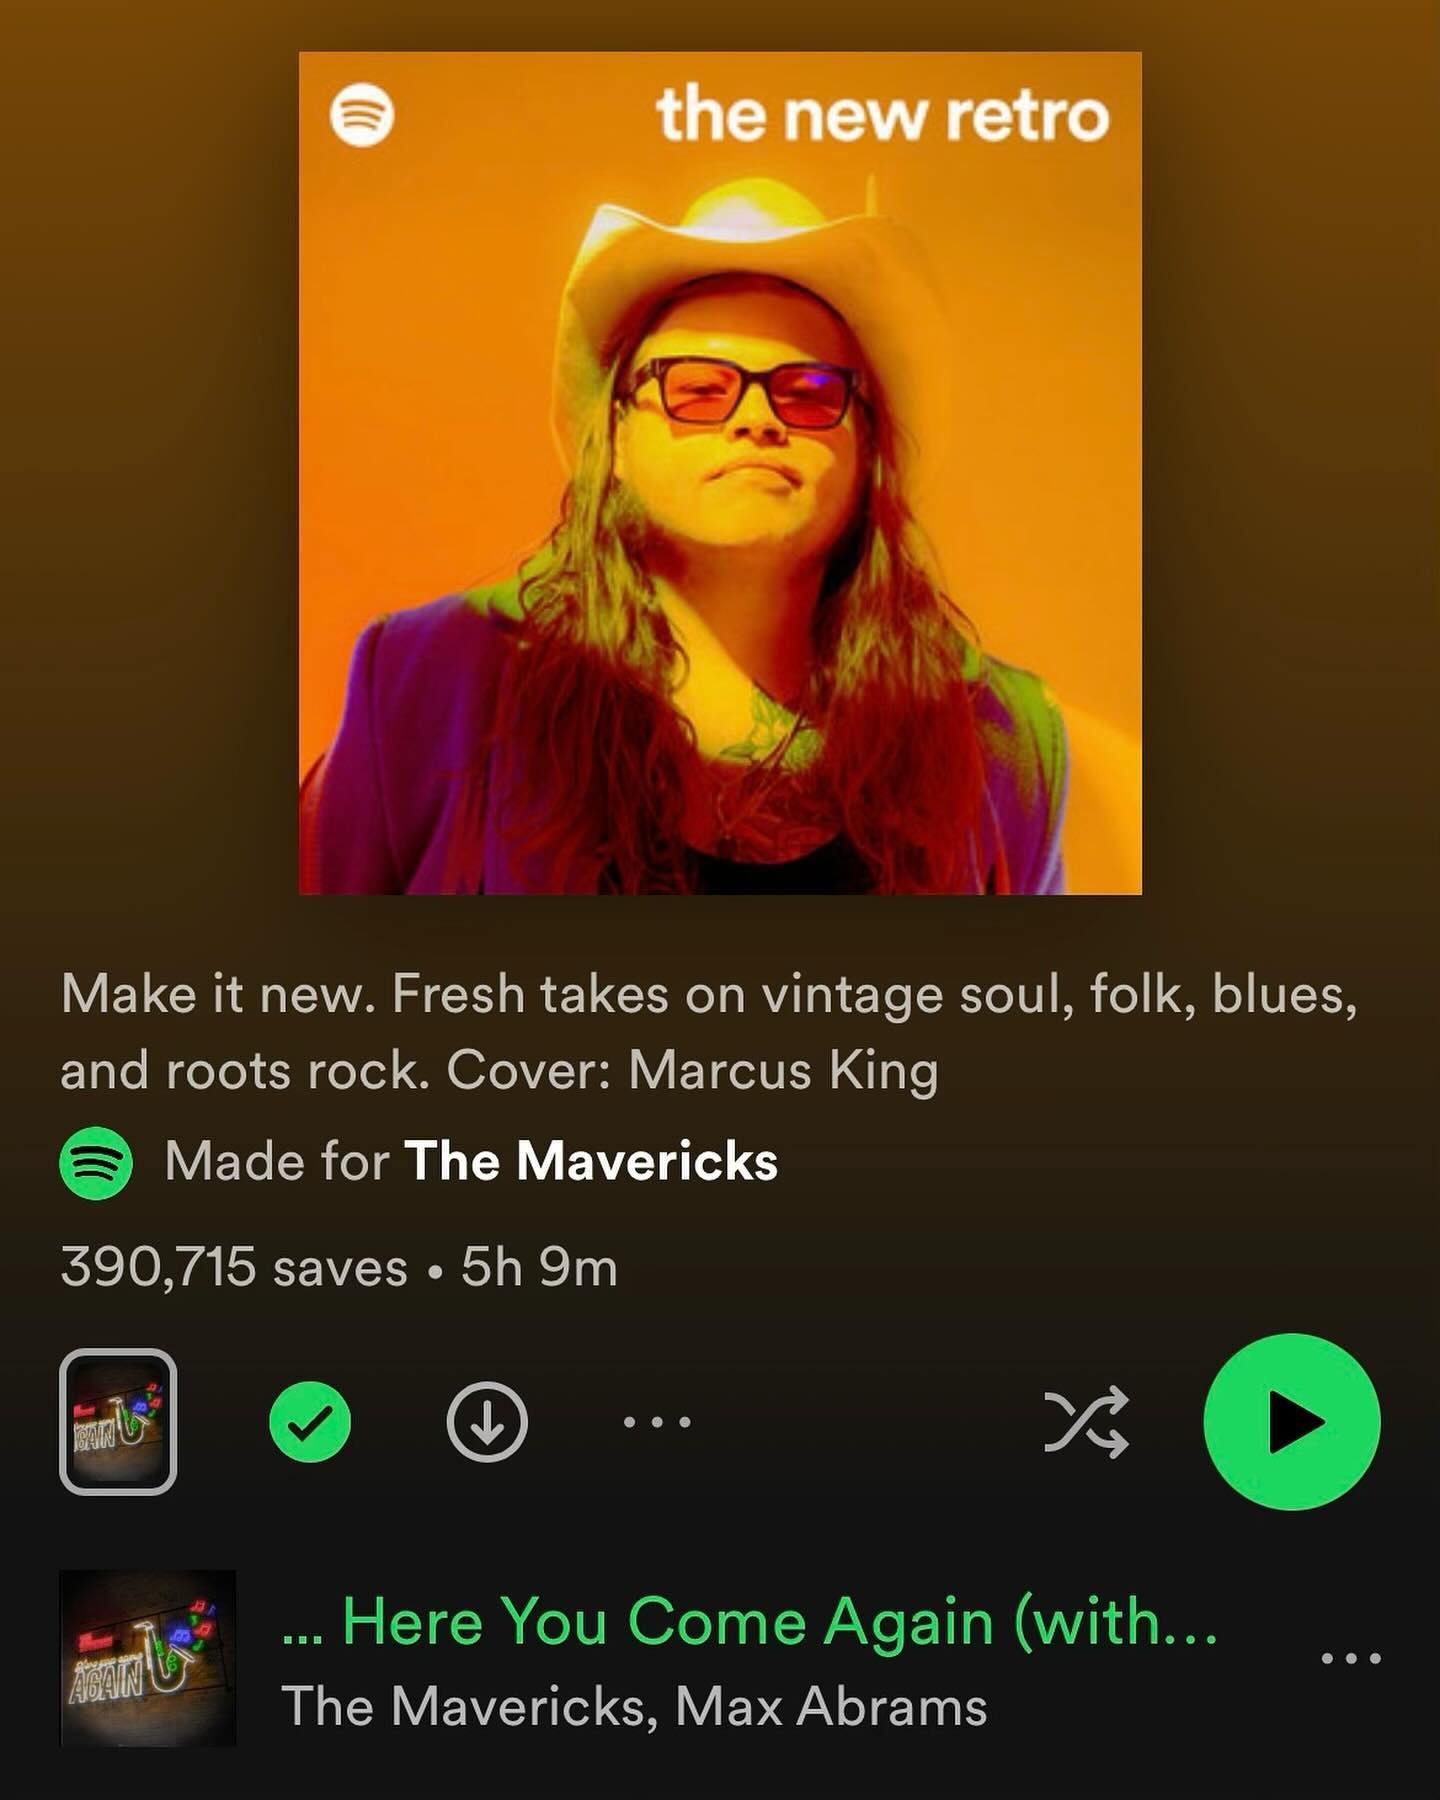 Thanks @spotify for including our new song &lsquo;Here You Come Again&rsquo; on &lsquo;the new retro&rsquo; playlist 🎷 Add it to your library and listen now at the link in story! 🧡 @monomundorecordings @thirtytigers

#TheMavericks #MoonAndStars #No